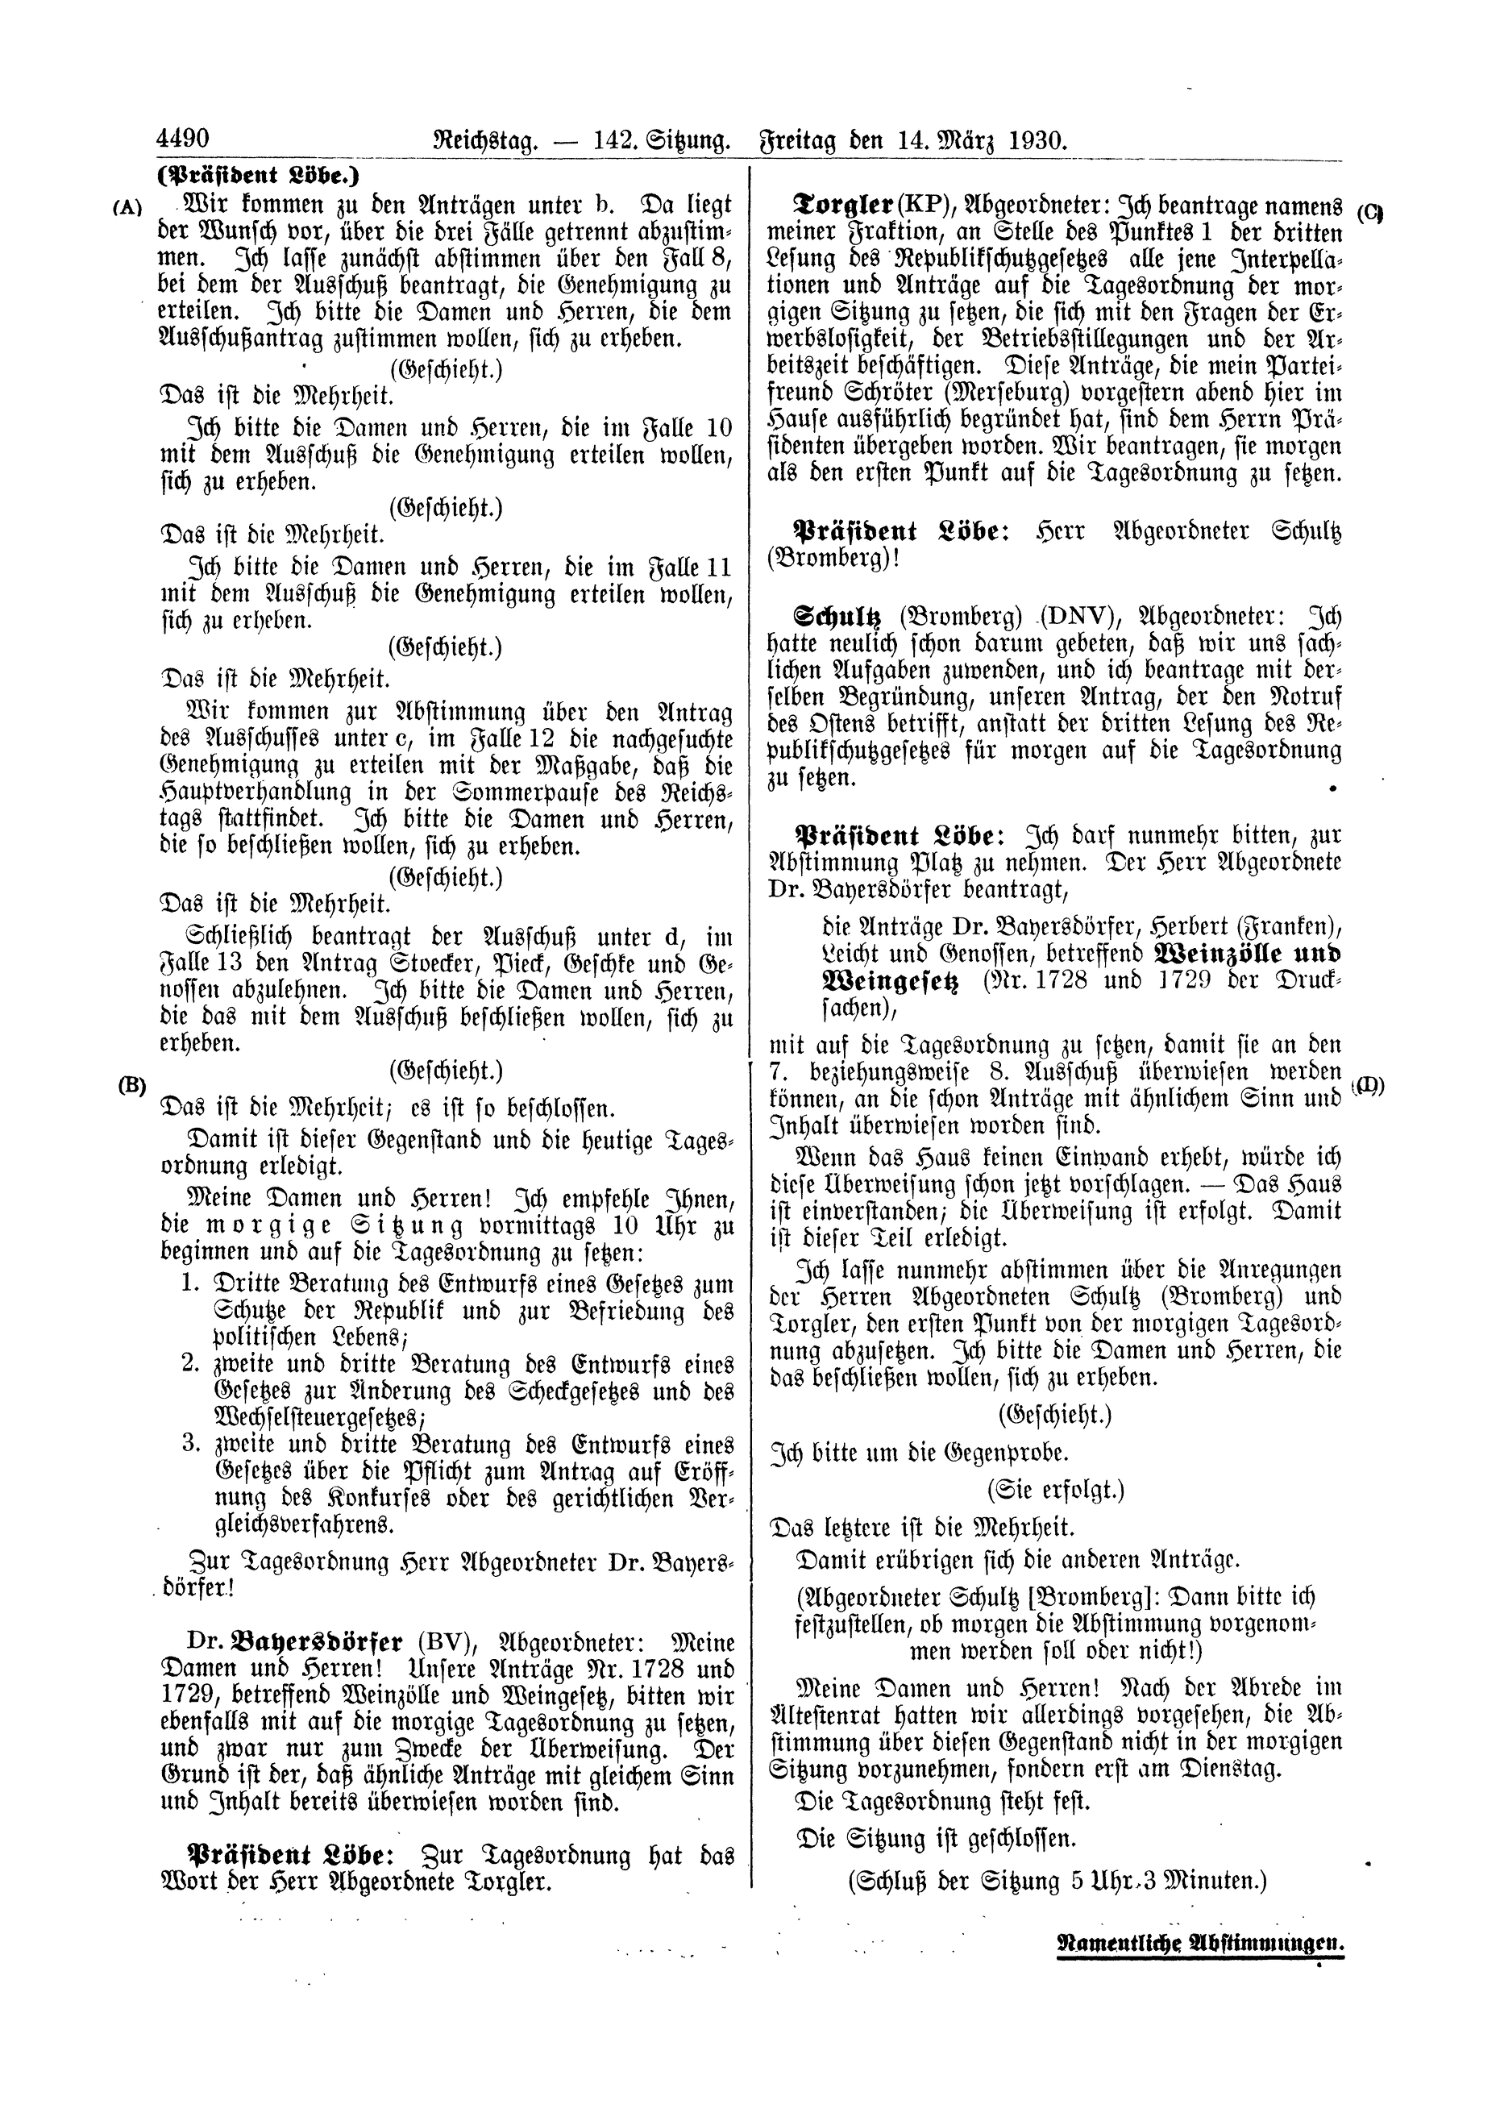 Scan of page 4490